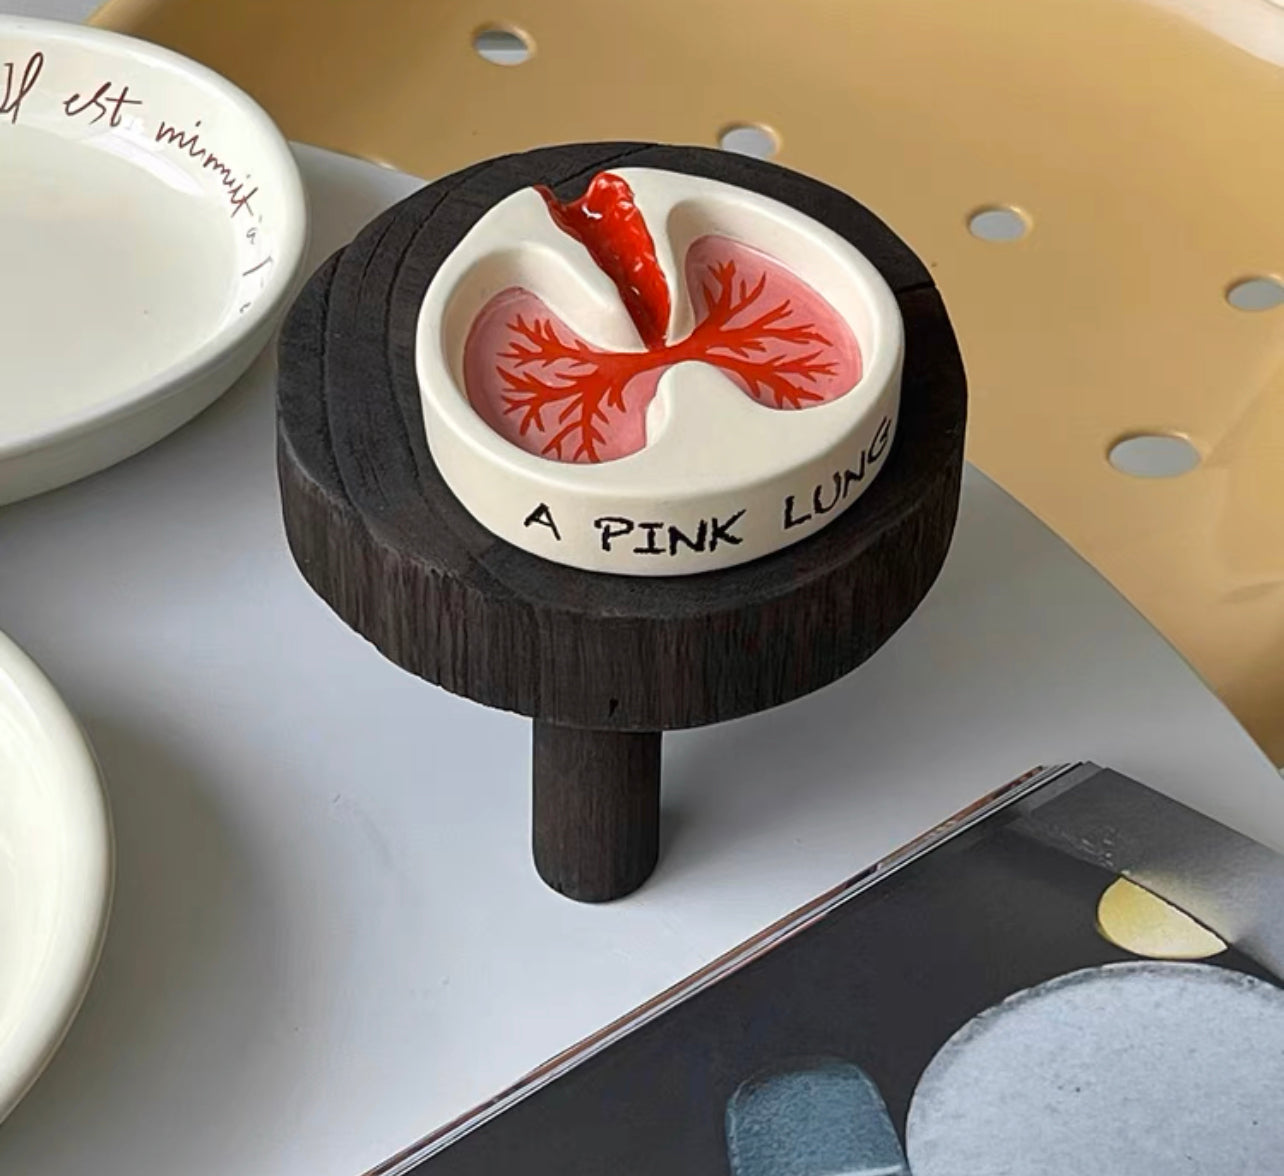 Pink Lungs Ashtray